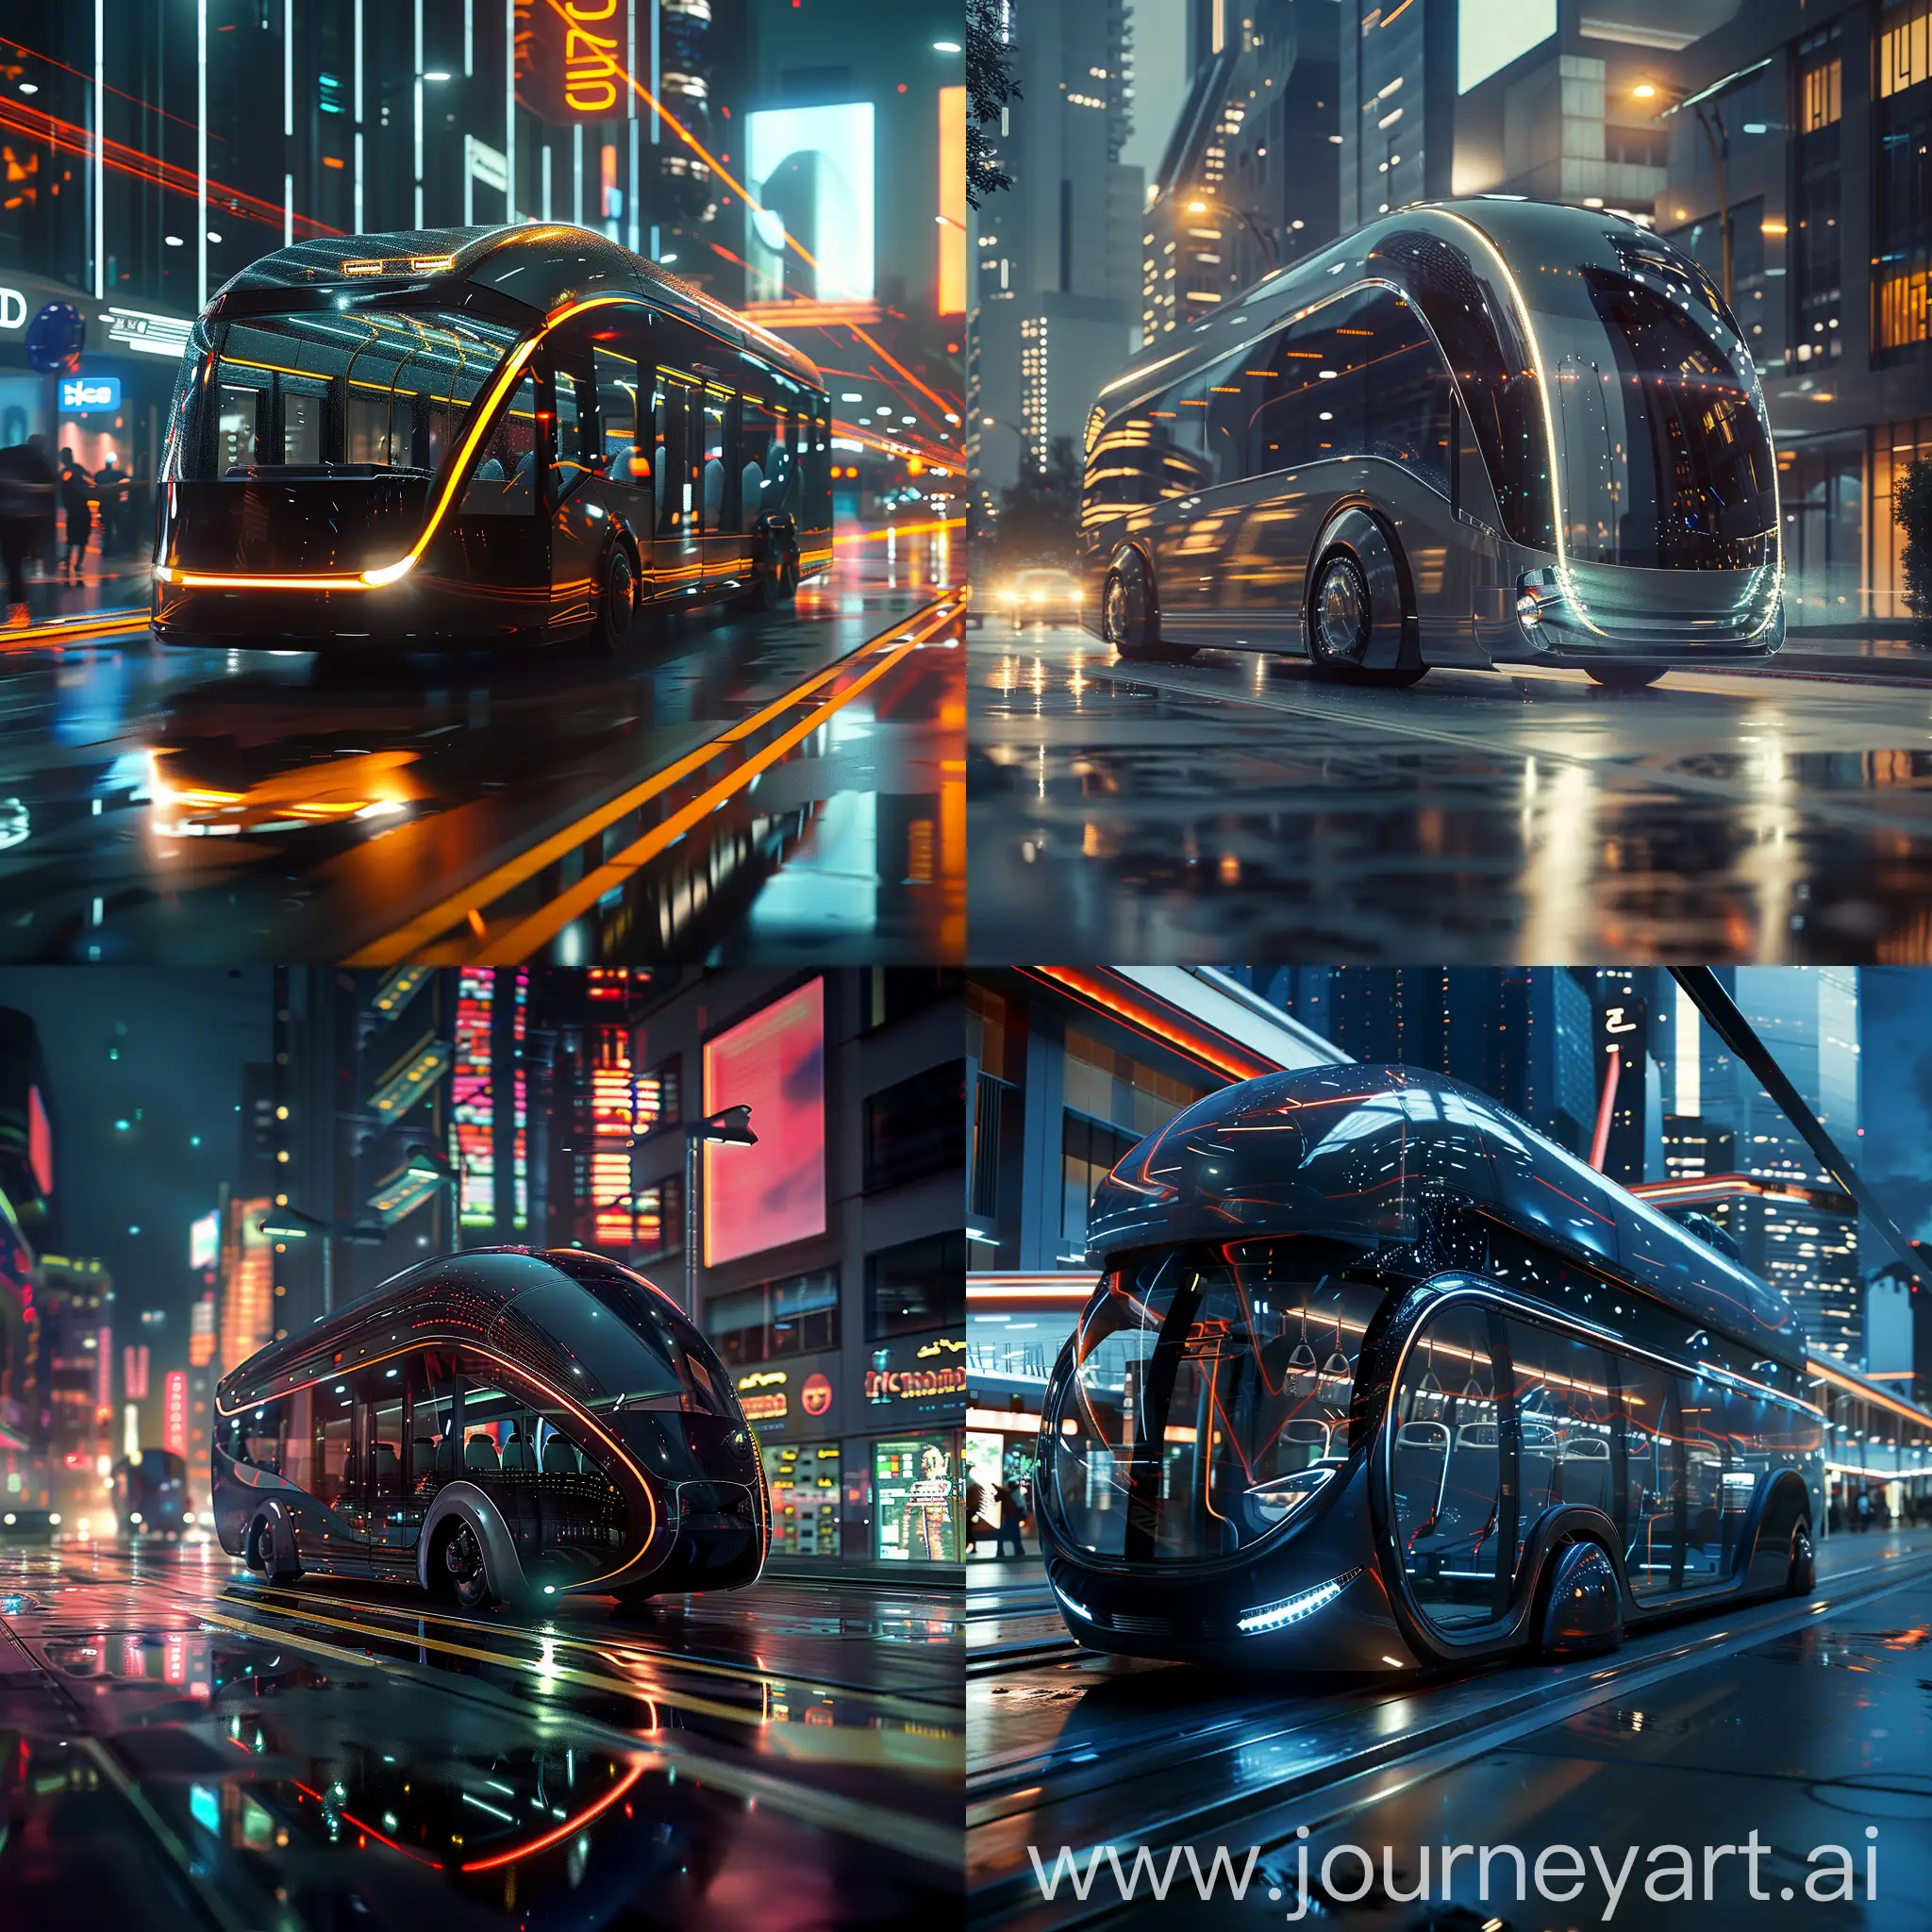 Futuristic-Bus-in-Urban-Cityscape-with-Glowing-LED-Lights